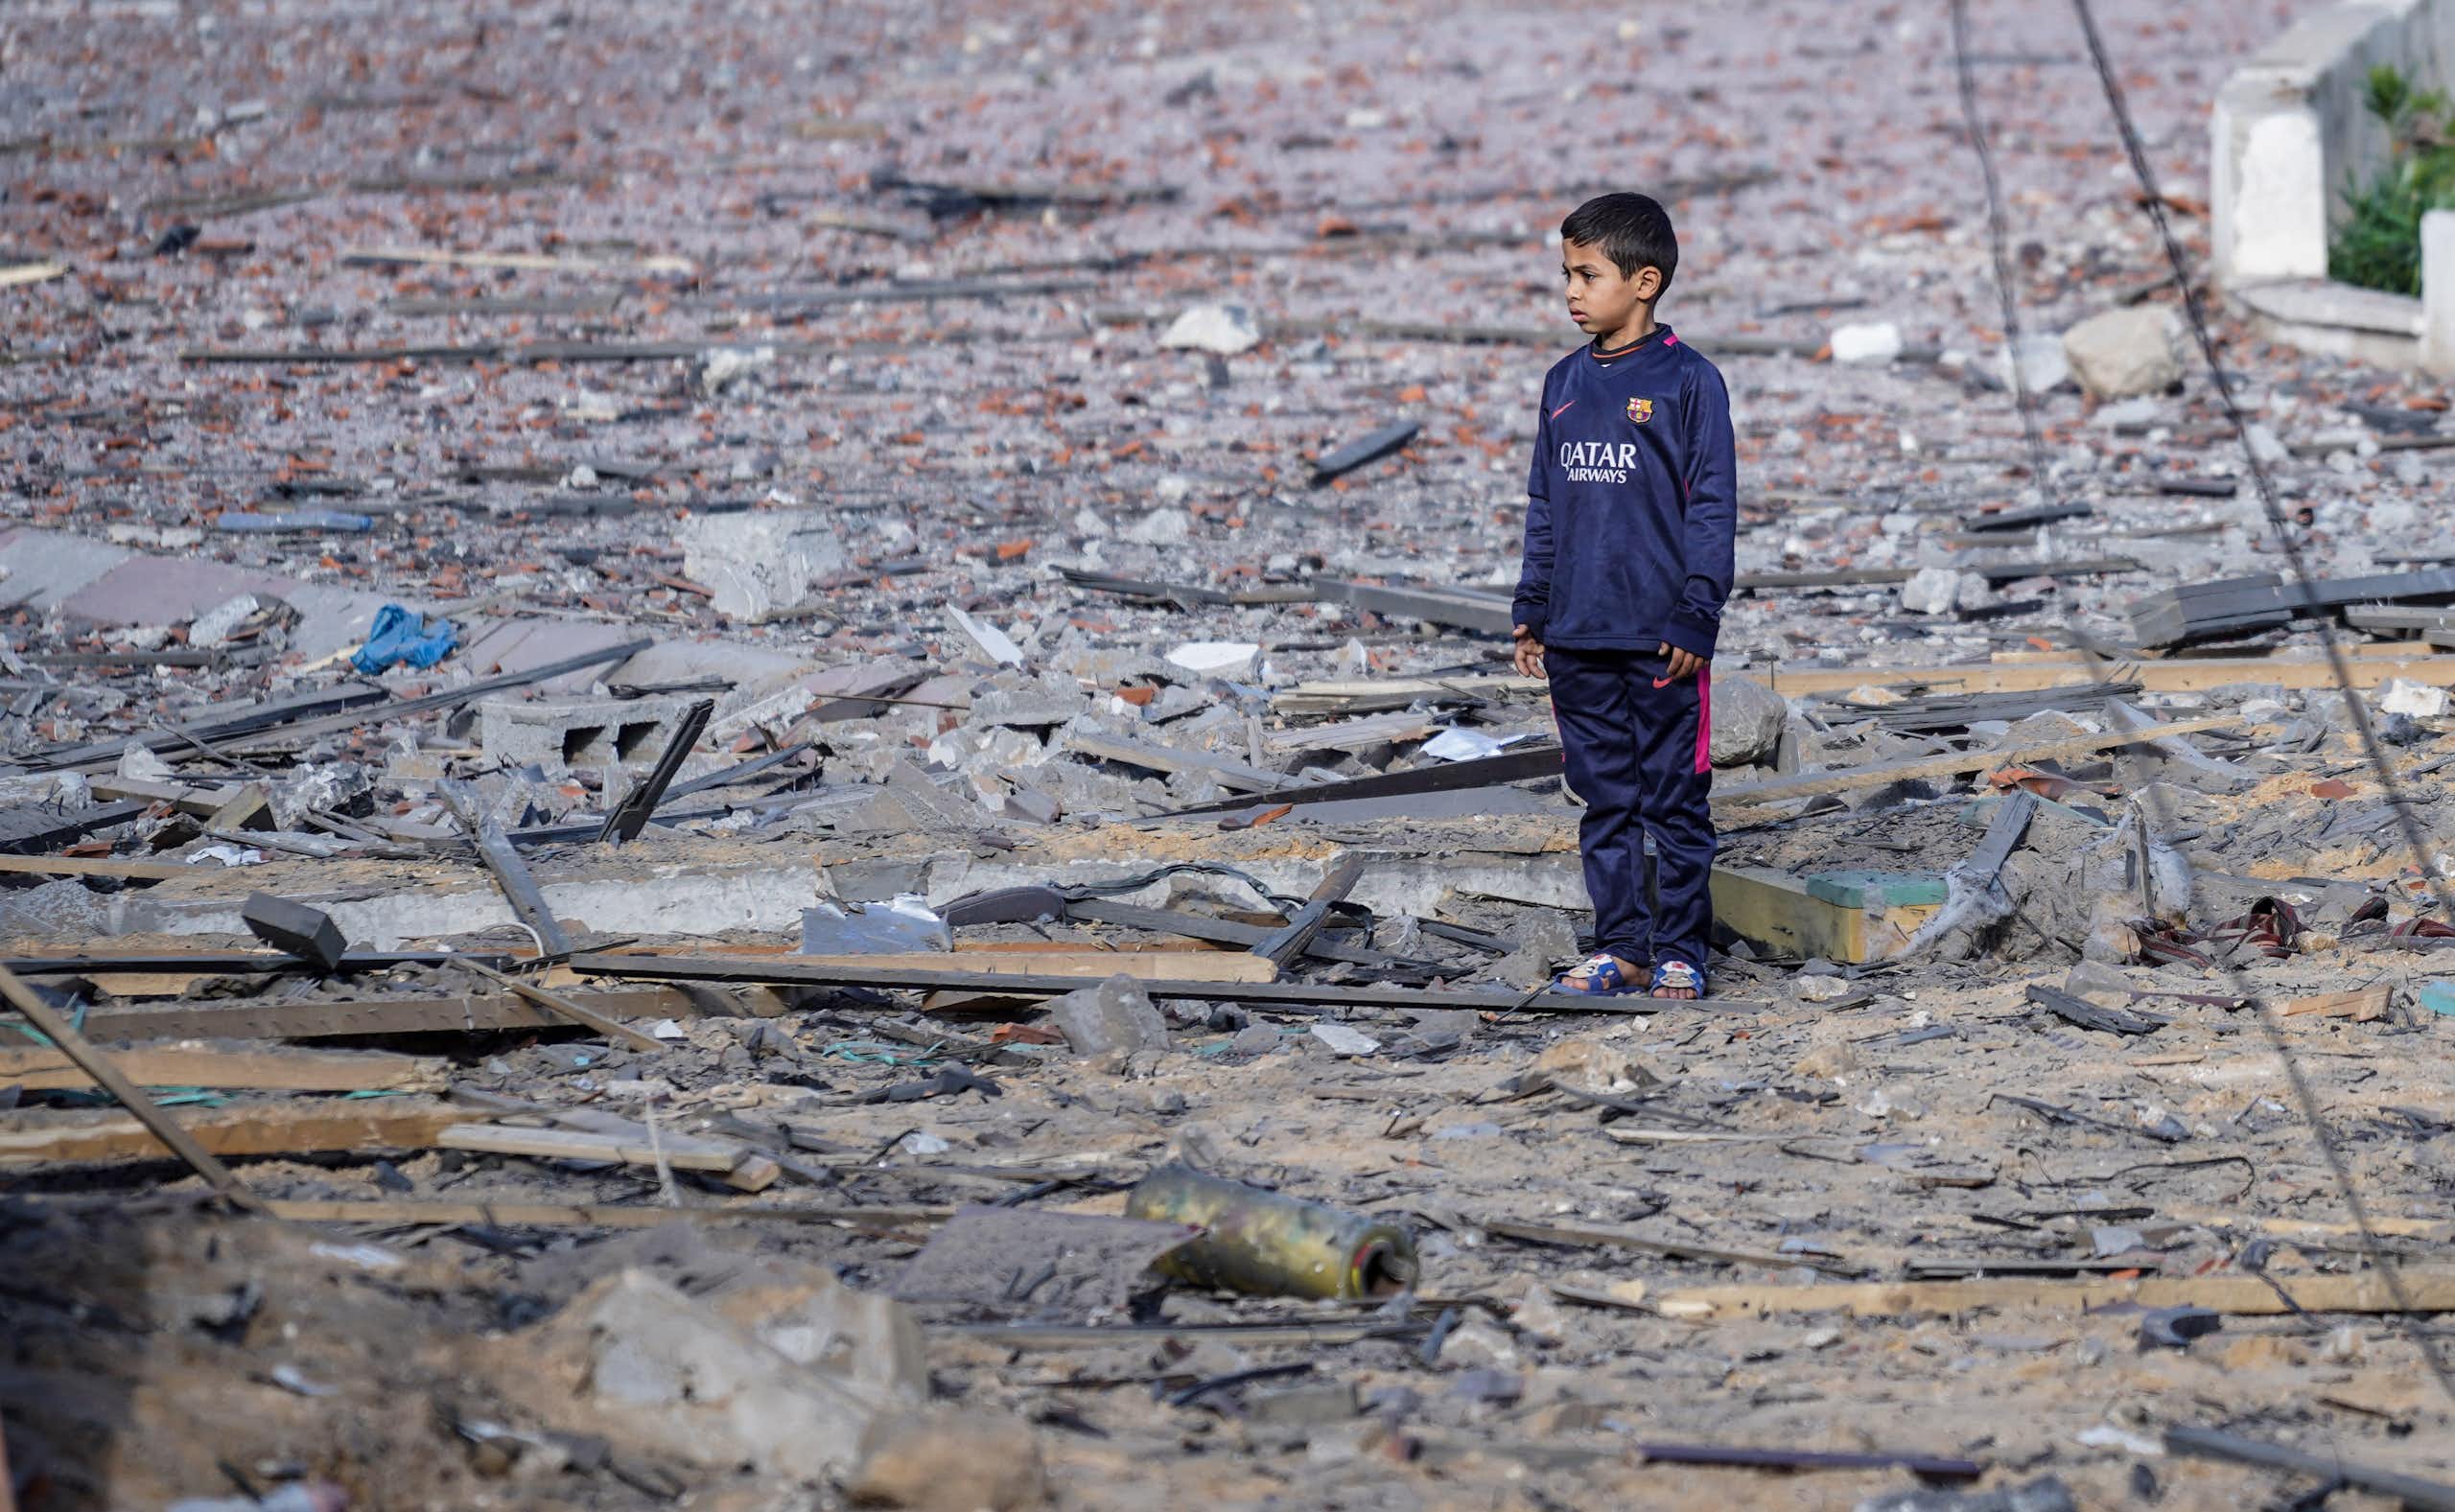 A child standing alone surrounded by rubbleA child seen standing alone surrounded by rubble.